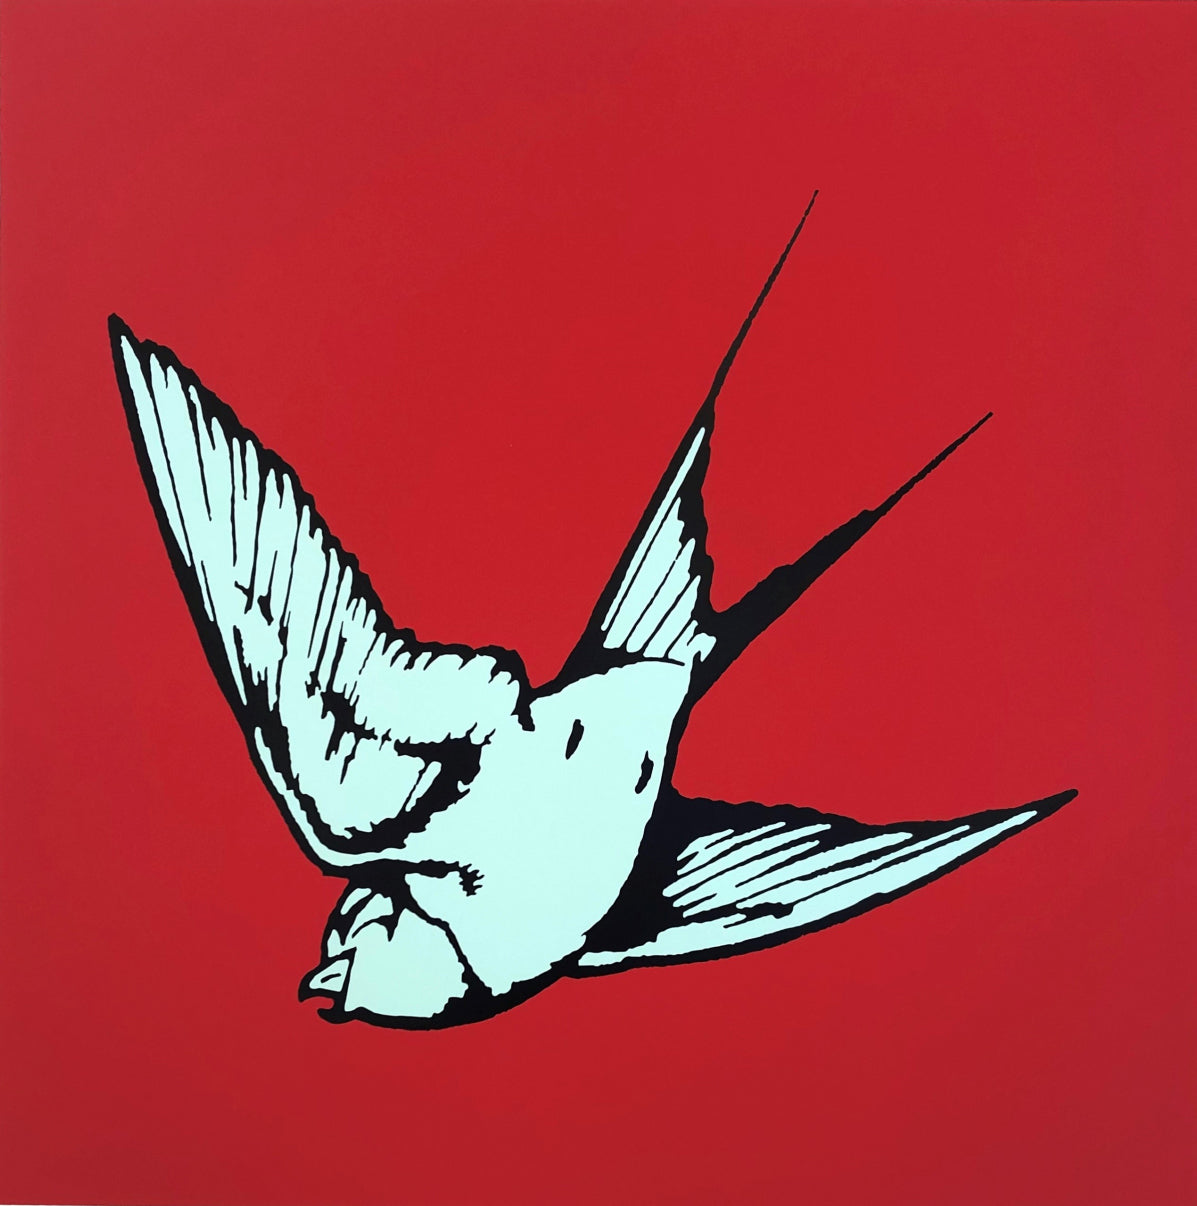 Dan Baldwin limited edition print of Mint green Hummingbird on a red background